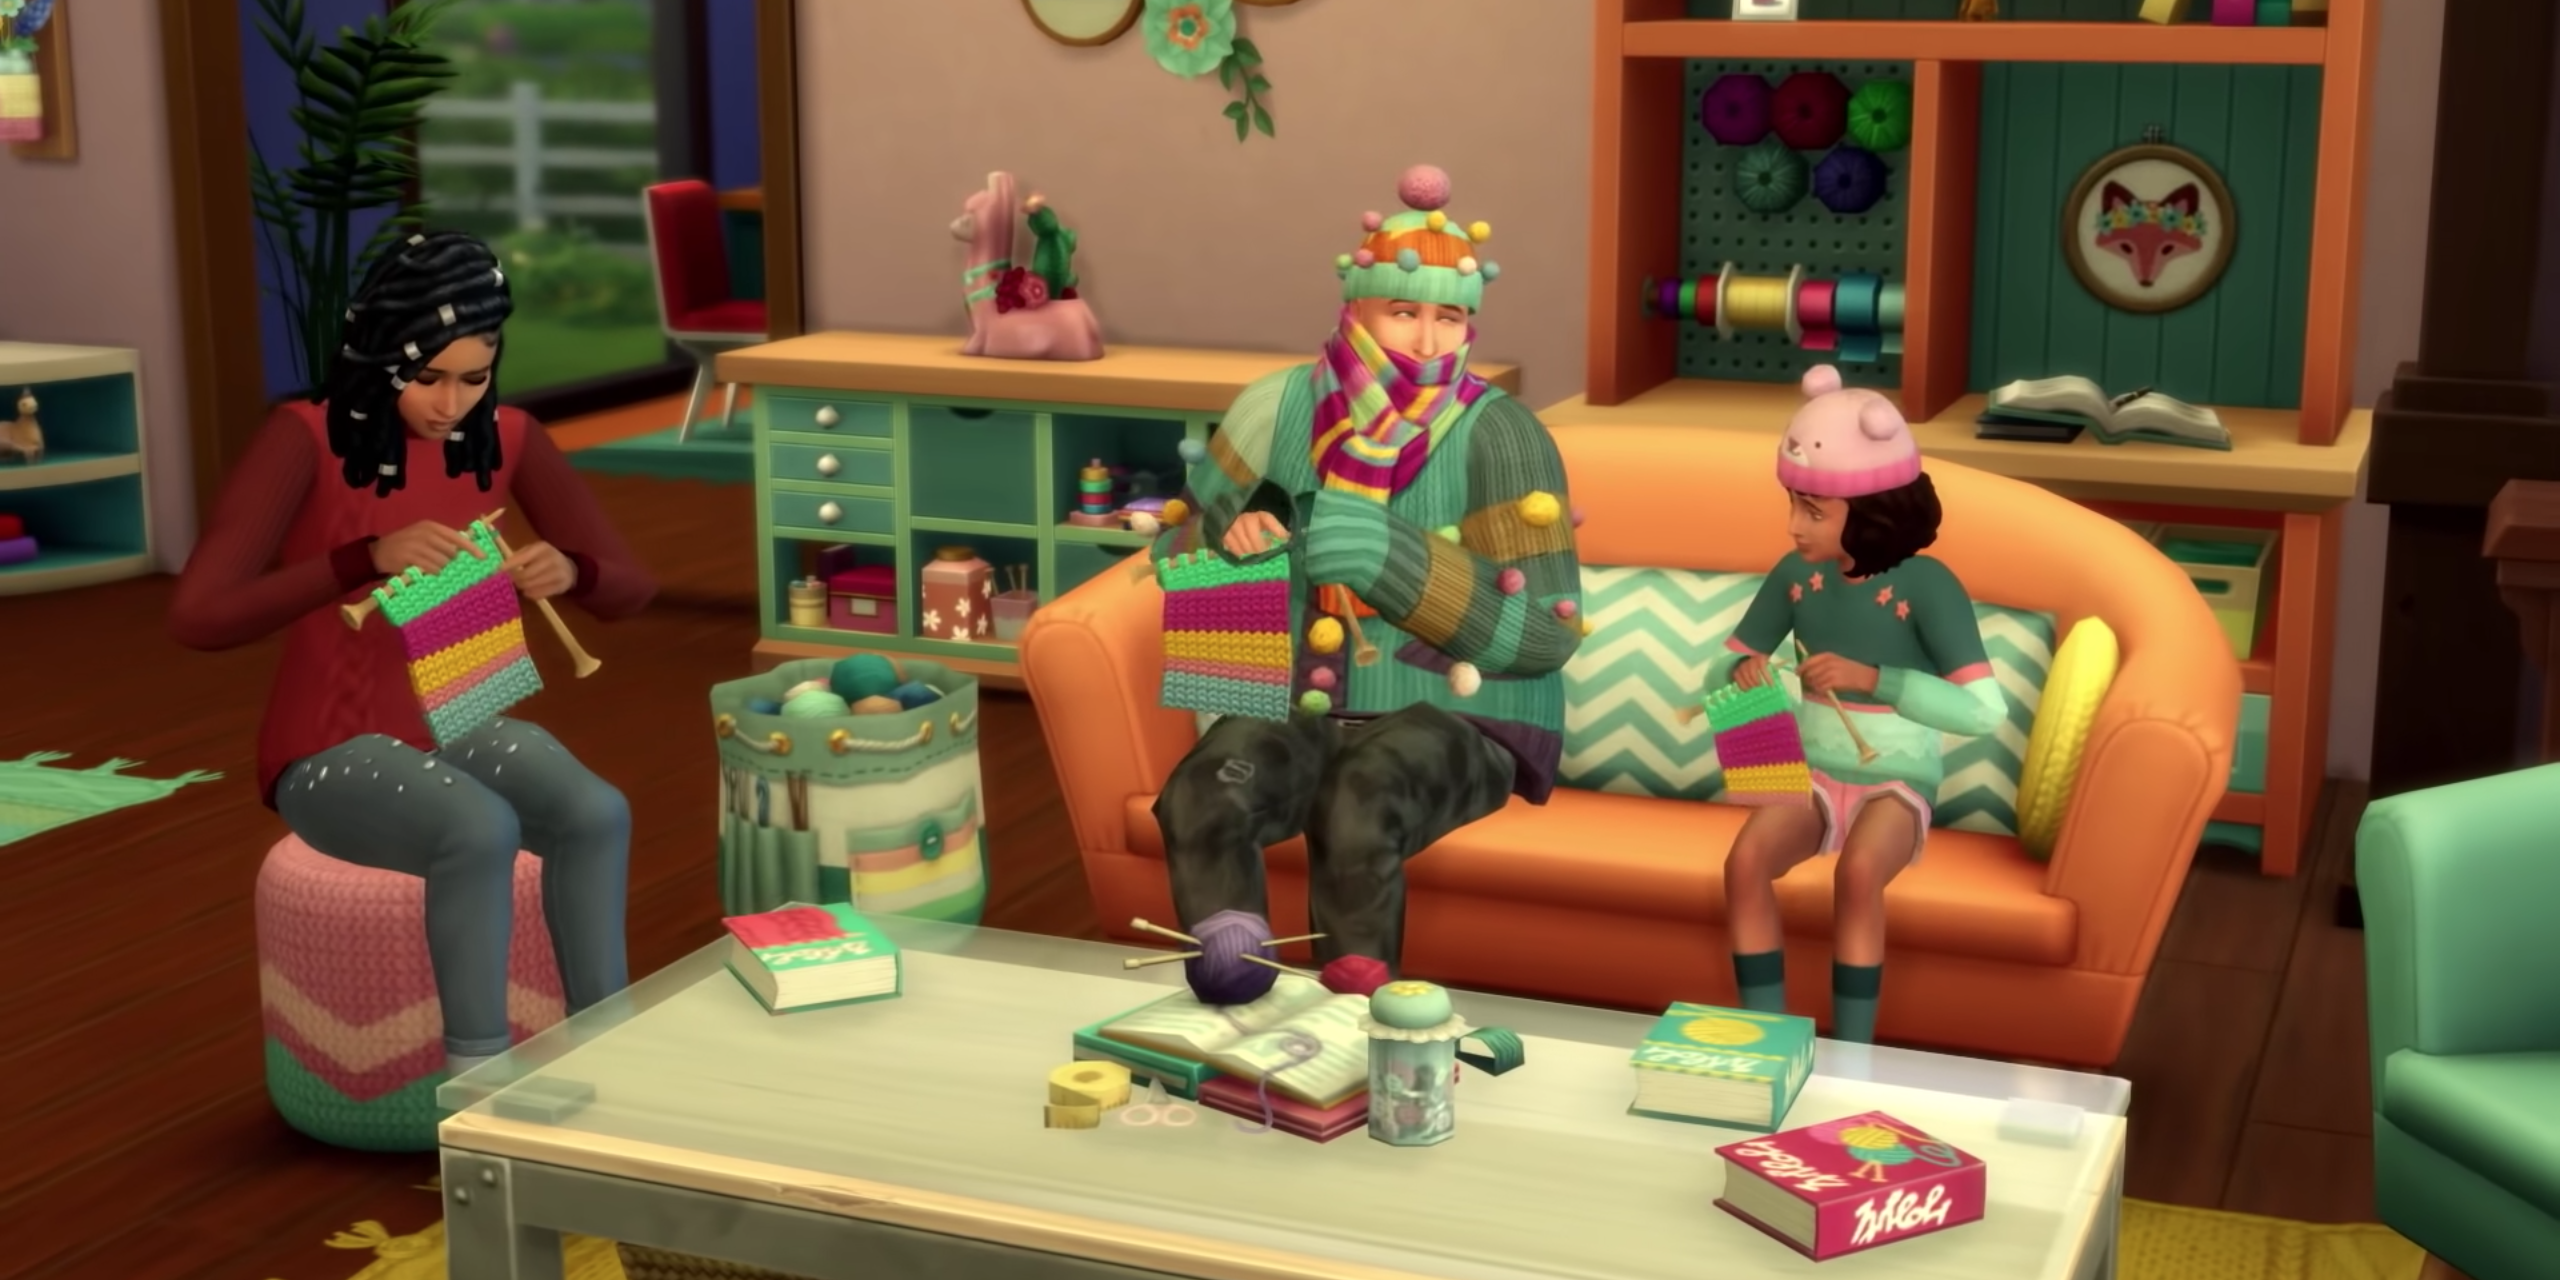 A family of Sims learn how to knit together